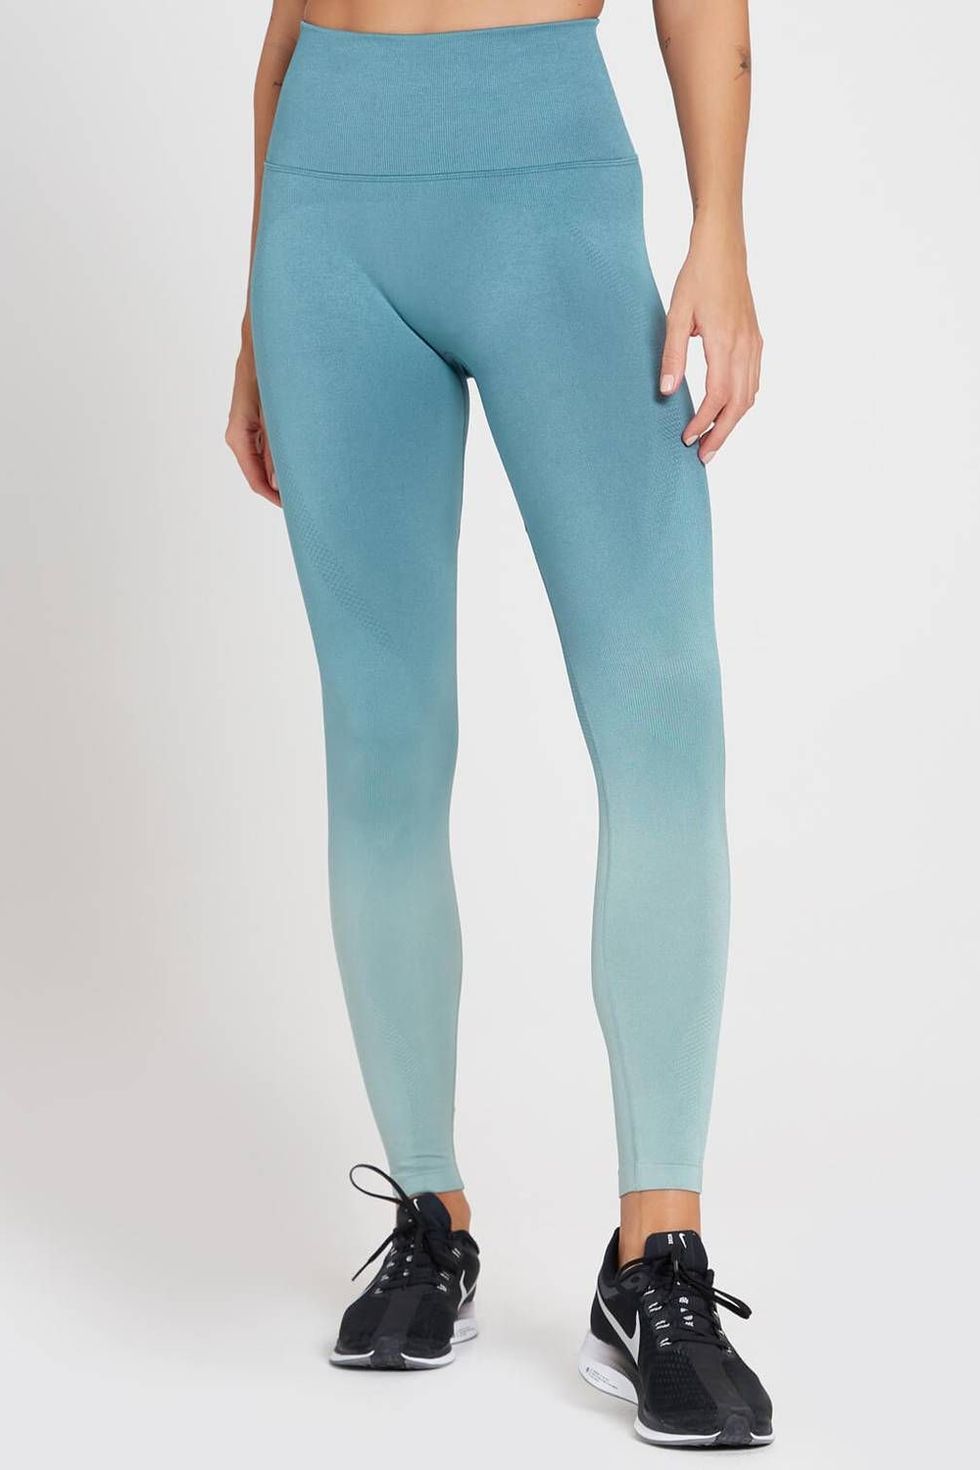 Seamless Gym womens Pants With Pocket